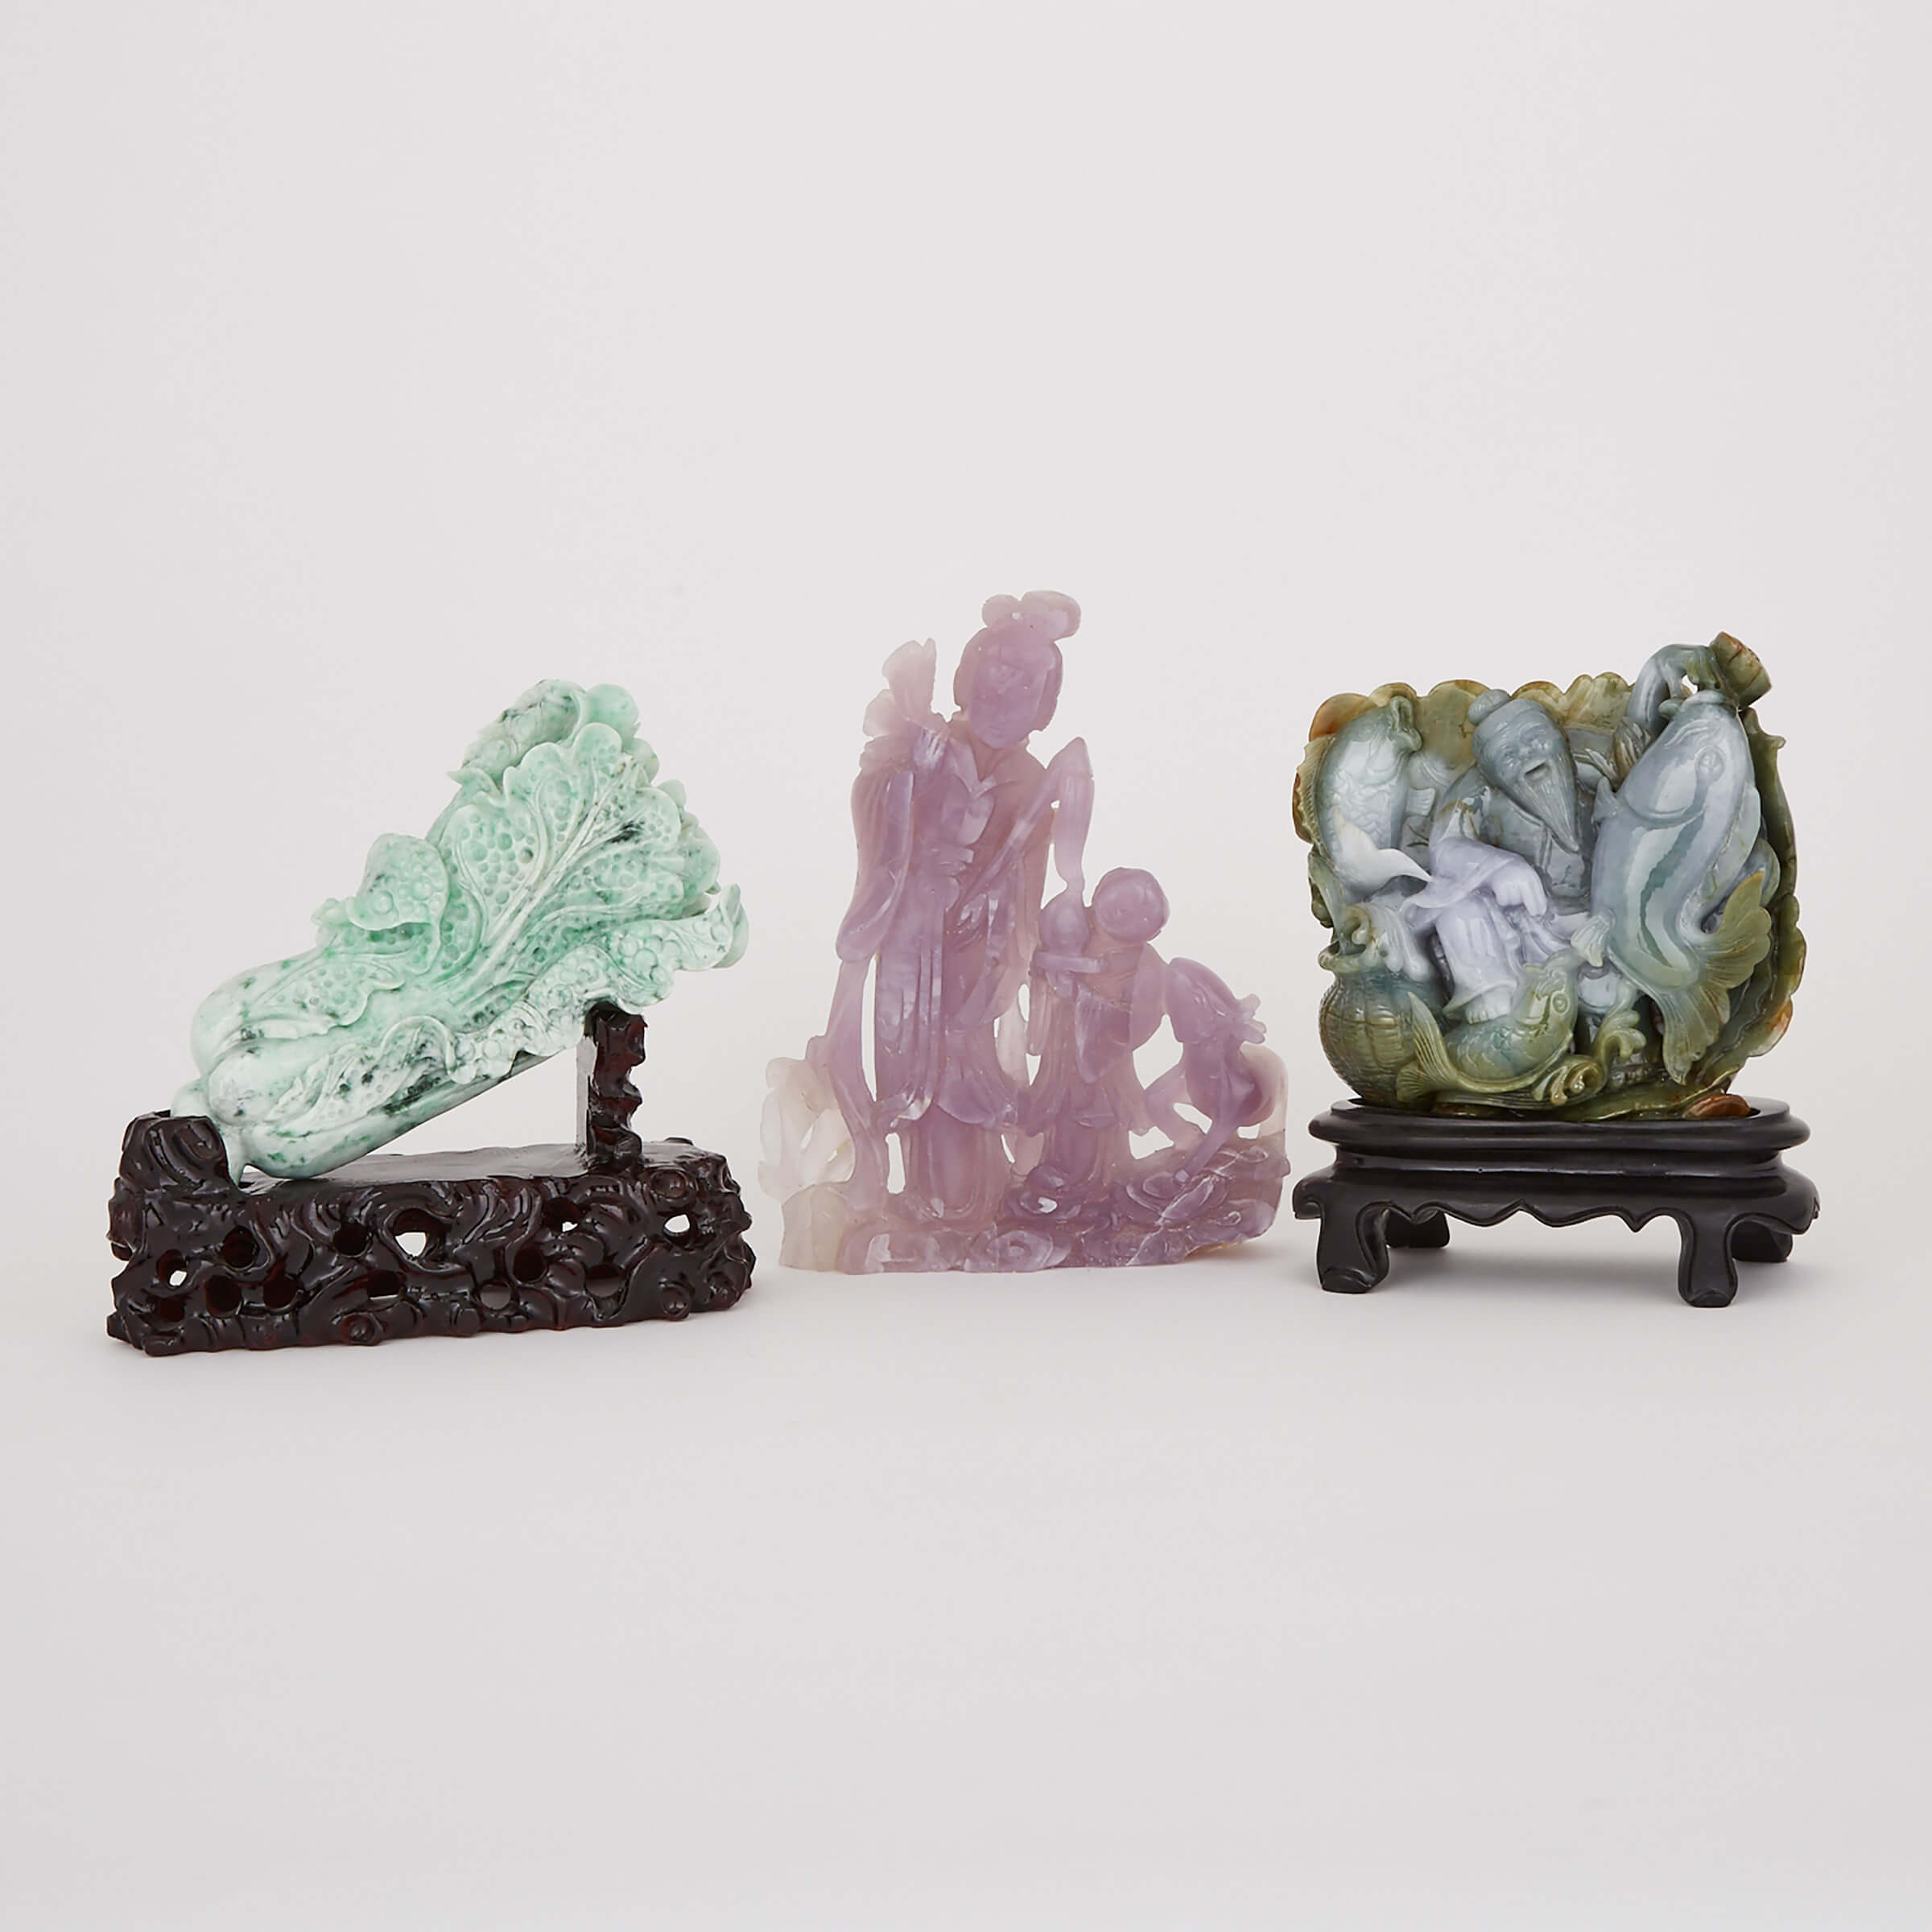 A Group of Three Hardstone Carvings